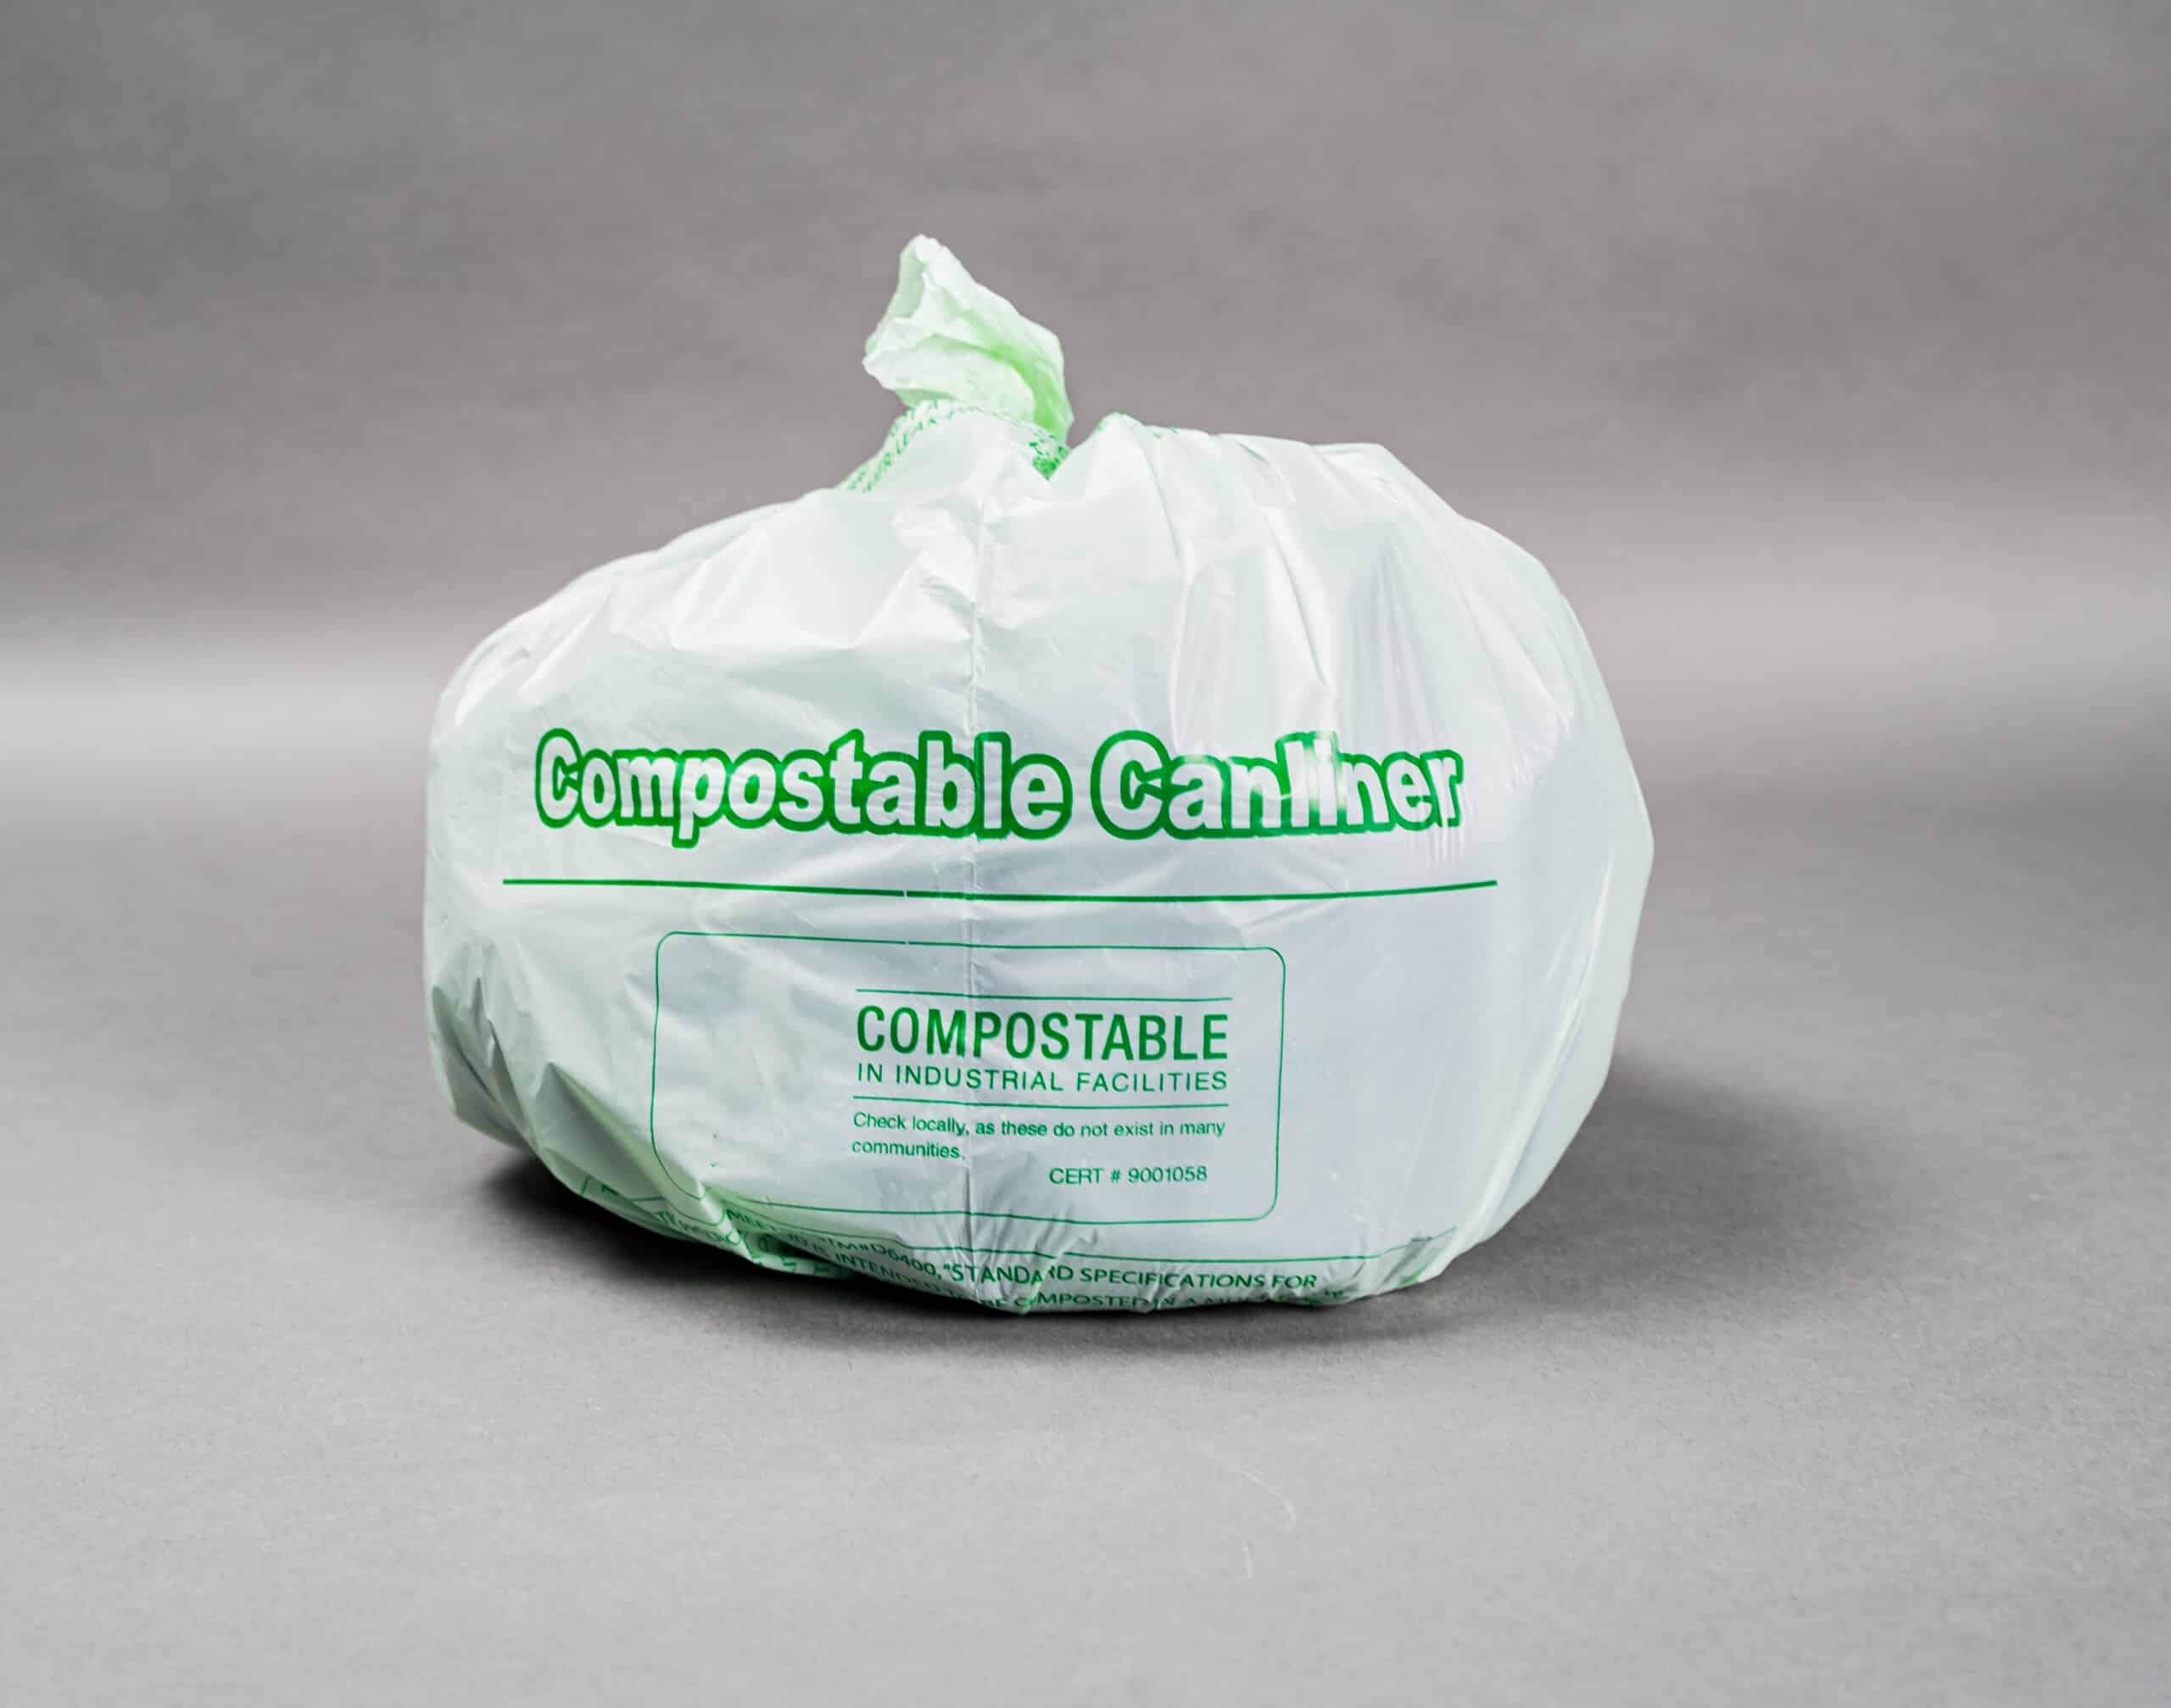 Biodegradable restaurant bags with custom prints